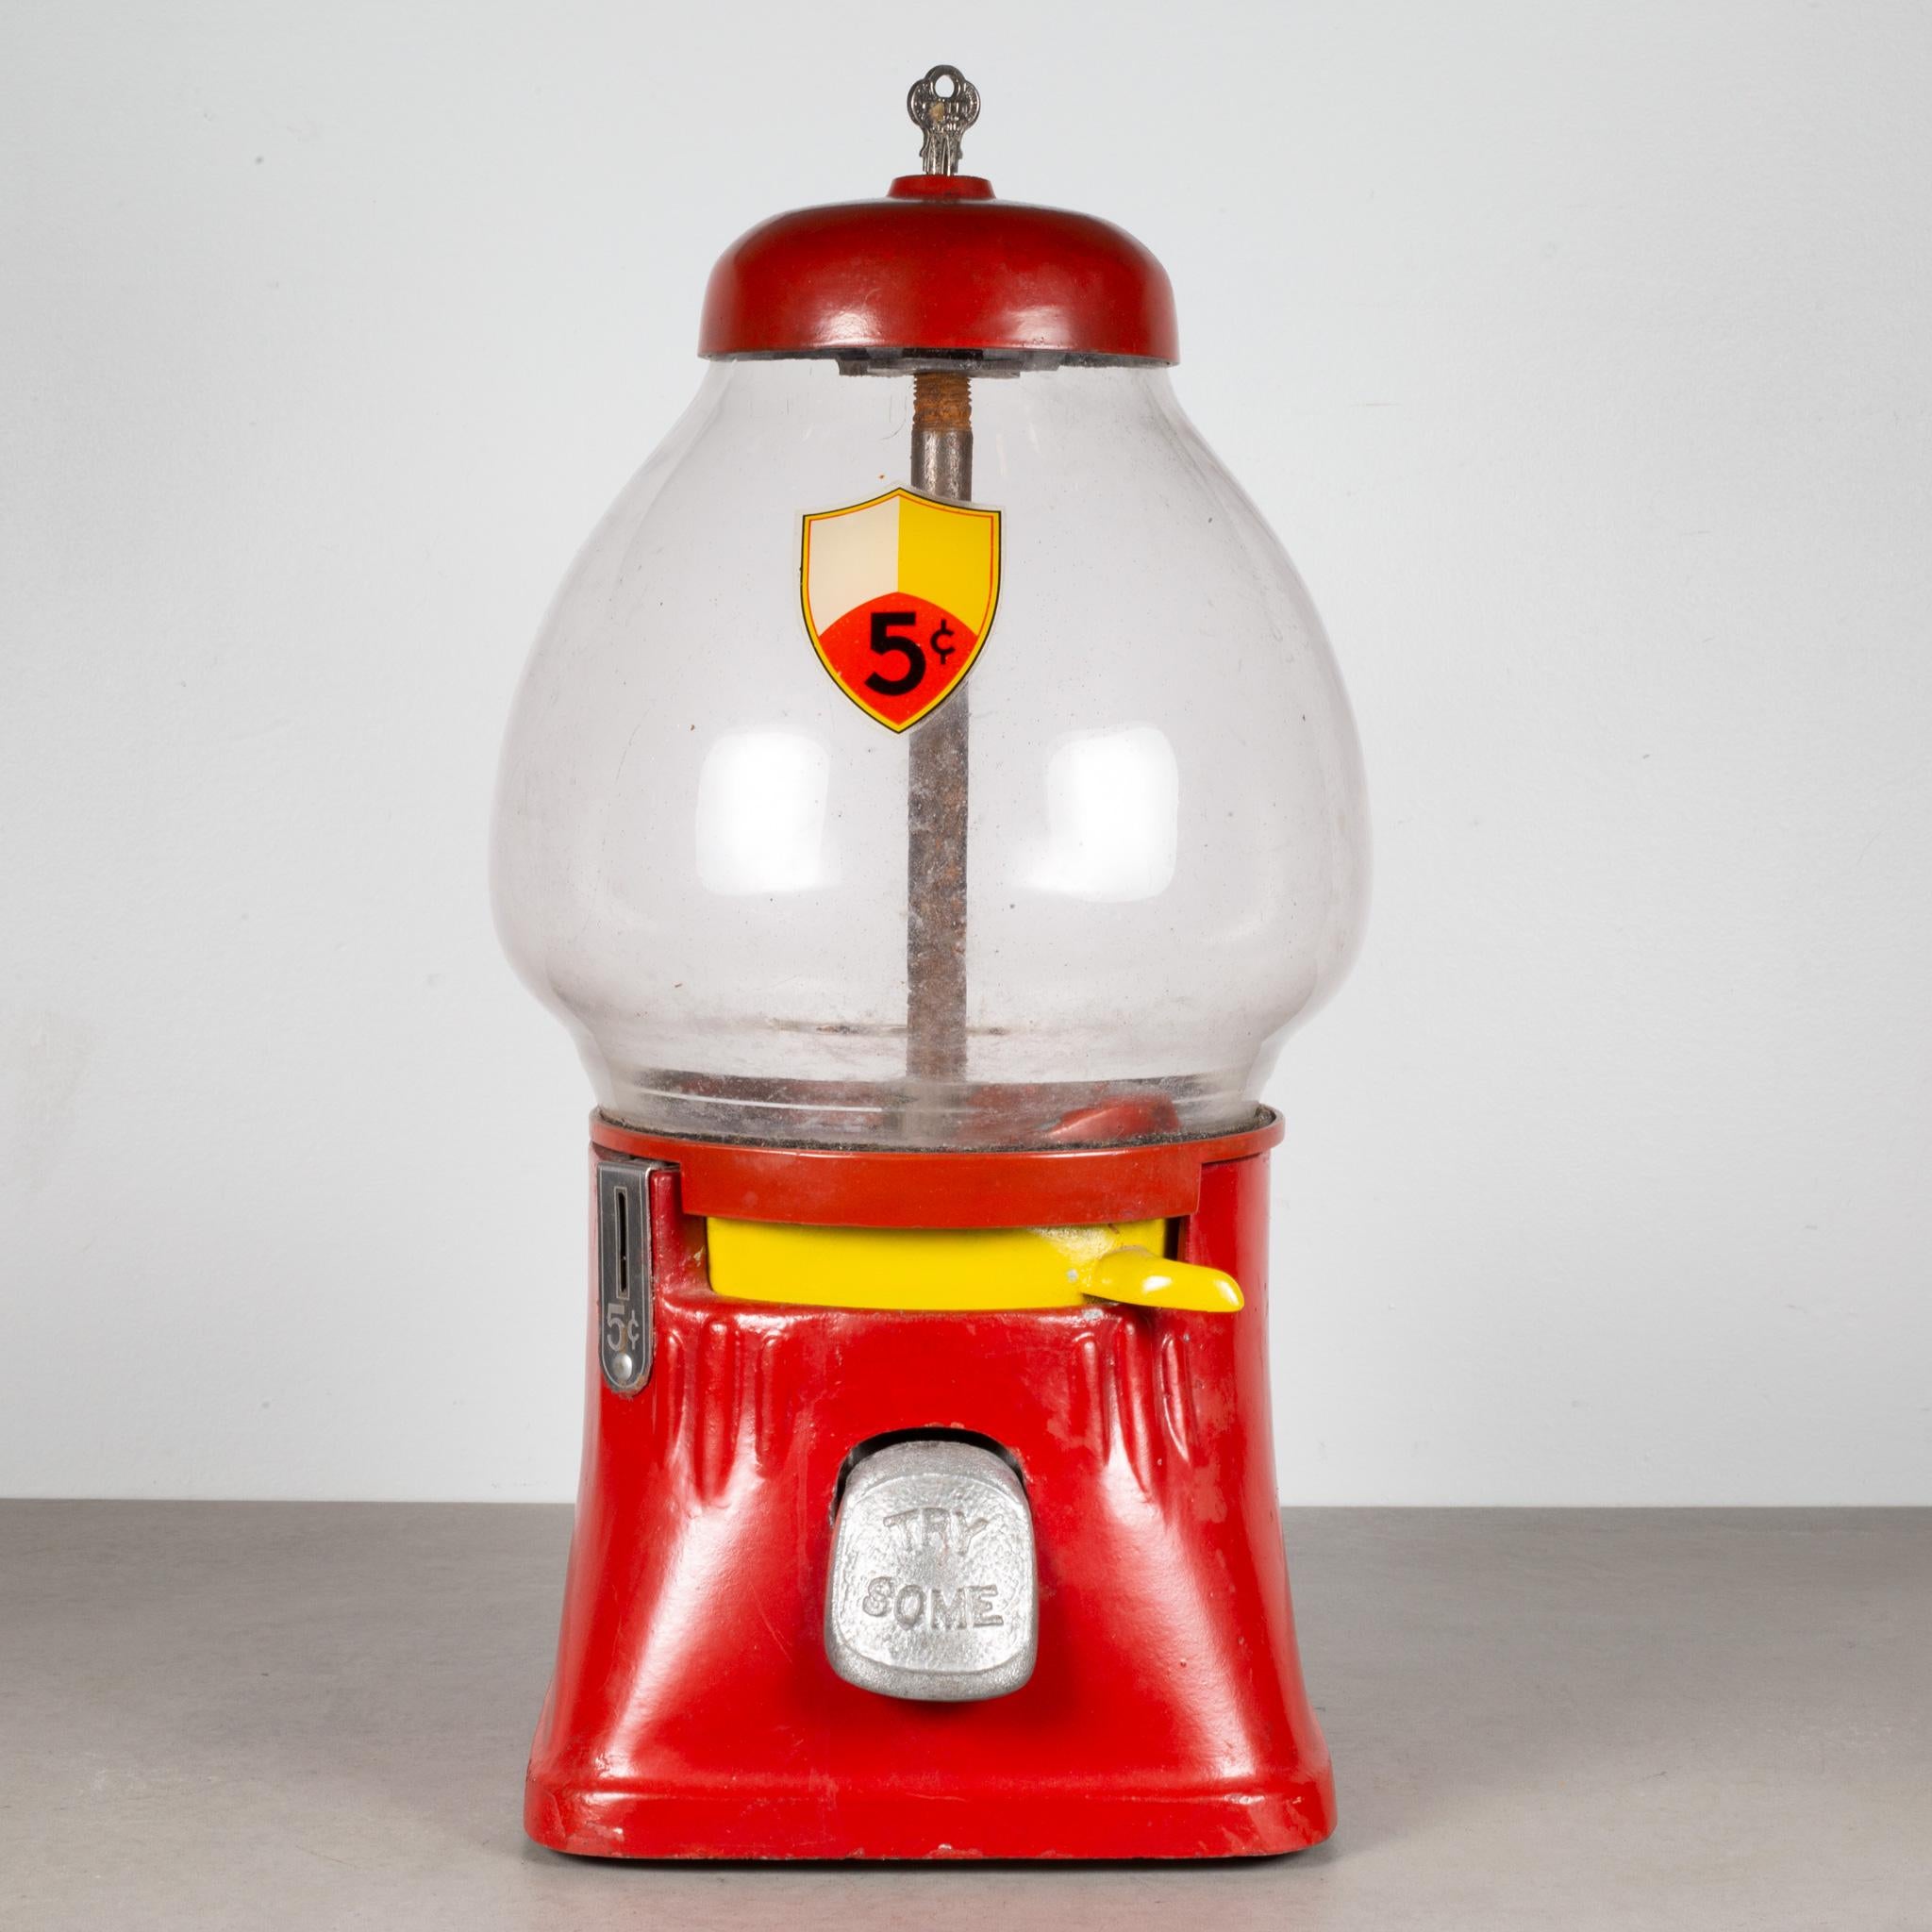 ABOUT

An antique 5 cent gum ball machine with hand blown glass globe, red cast iron body, yellow pull lever and original 5 cent decal. 